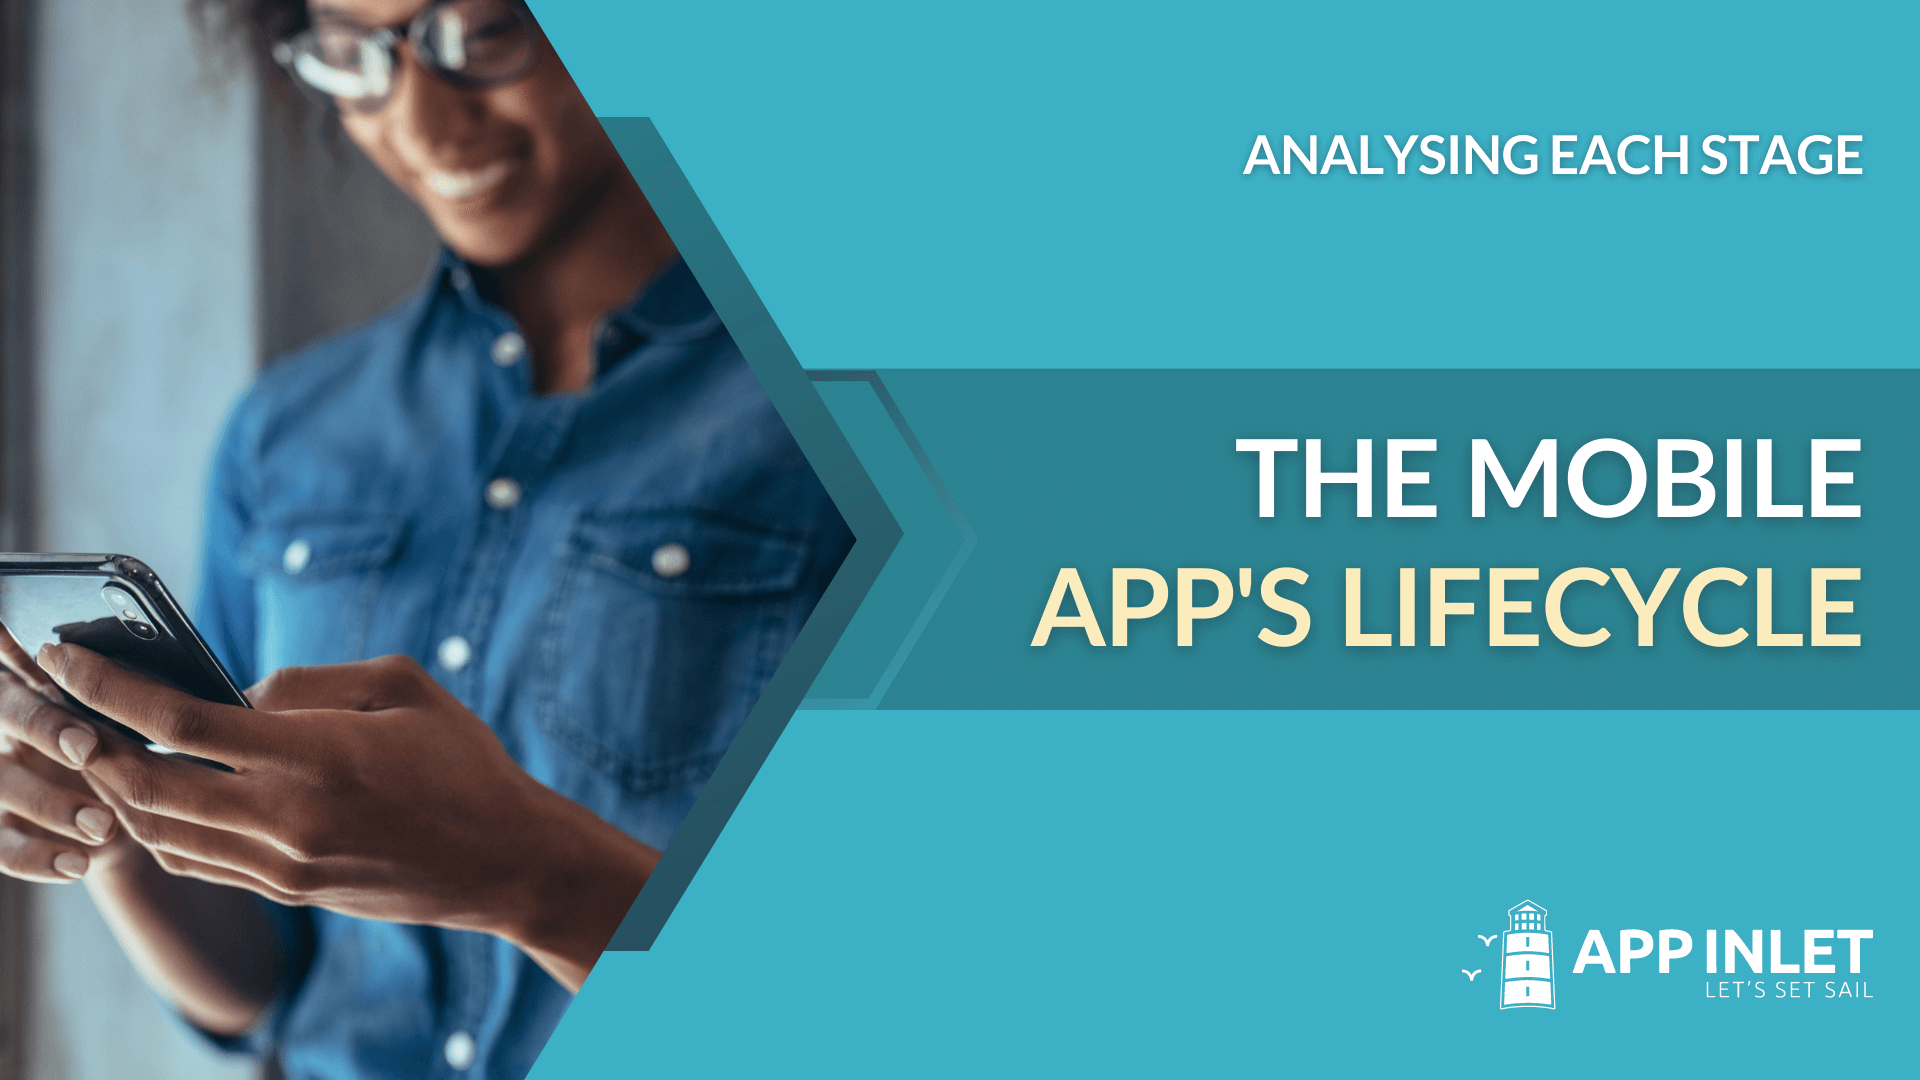 The Mobile App’s Lifecycle: Analysing Each Stage